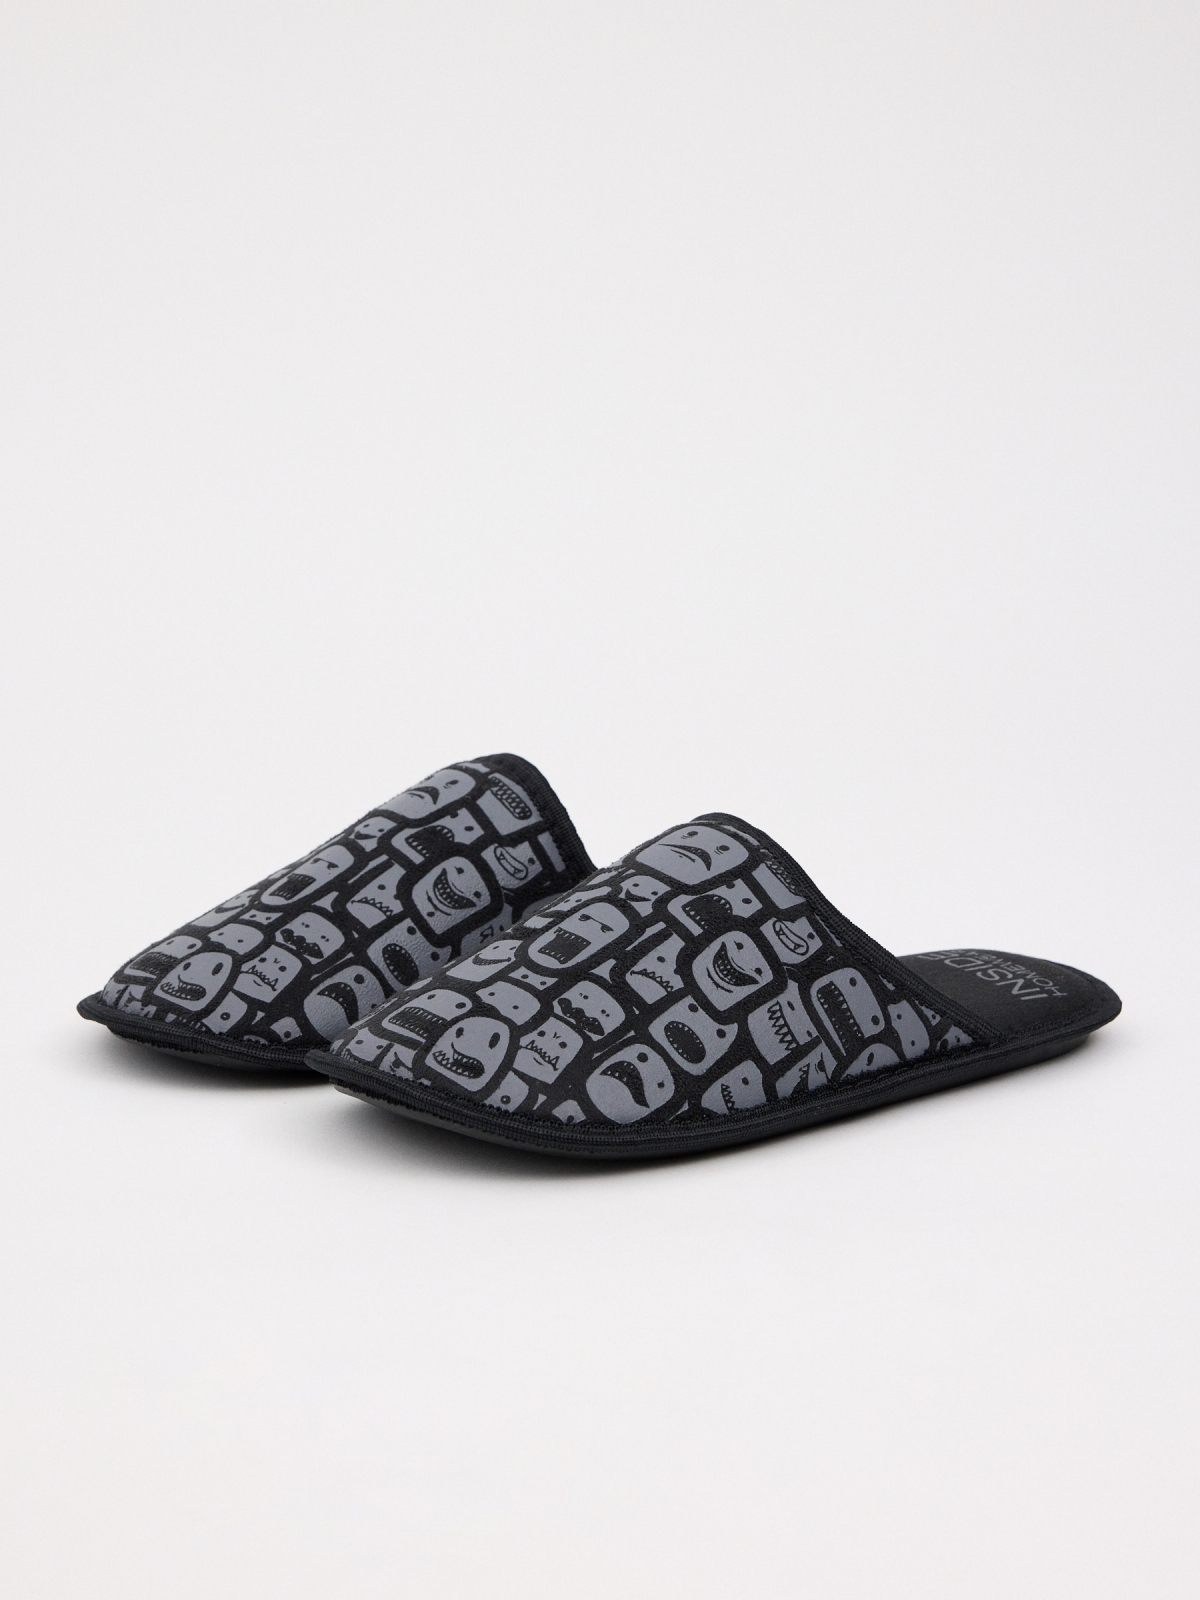 Printed slippers black middle back view